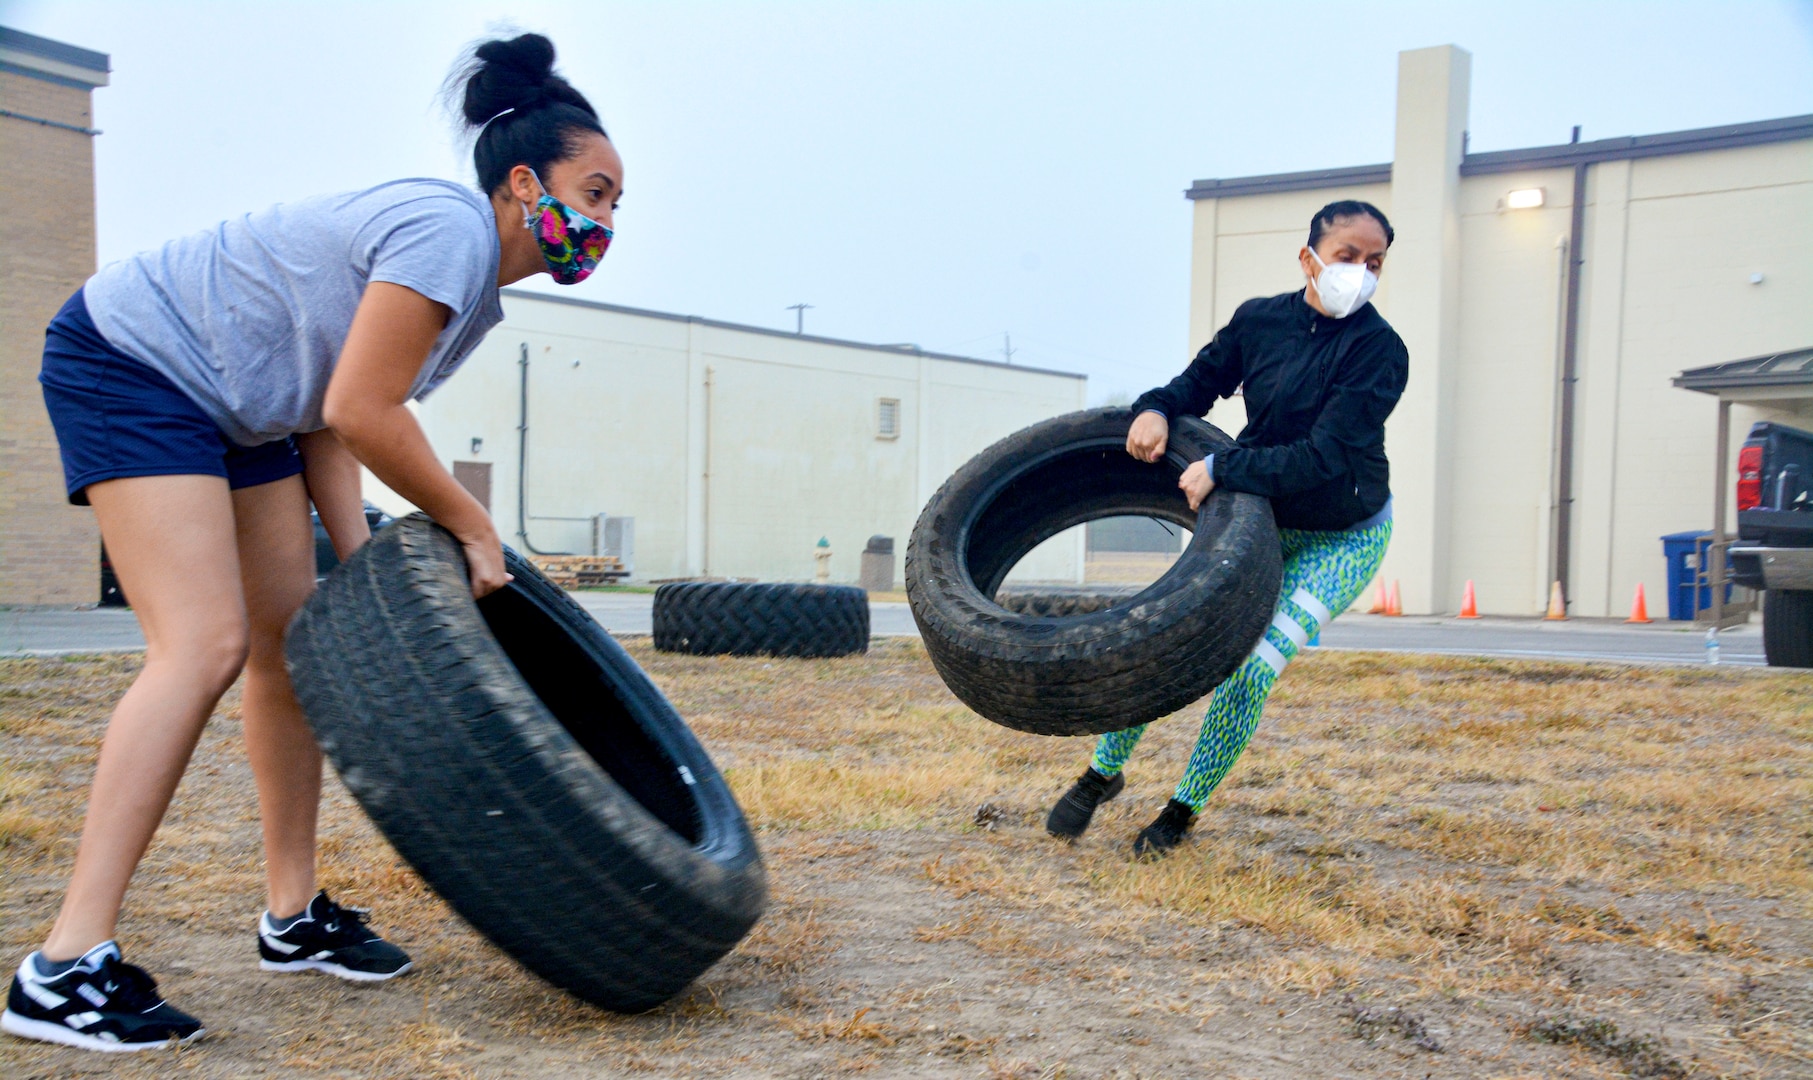 Master Sgts. Shatasha Estes, 55th Combat Communications Squadron first sergeant, and Jeanett Vielman, 50th Network Warfare Squadron first sergeant, throw tires during a team building exercise Nov. 19, 2020, during the 960th Cyberspace Wing leadership summit at Joint Base San Antonio-Chapman Training Annex, Texas. (U.S. Air Force photo by Samantha Mathison)